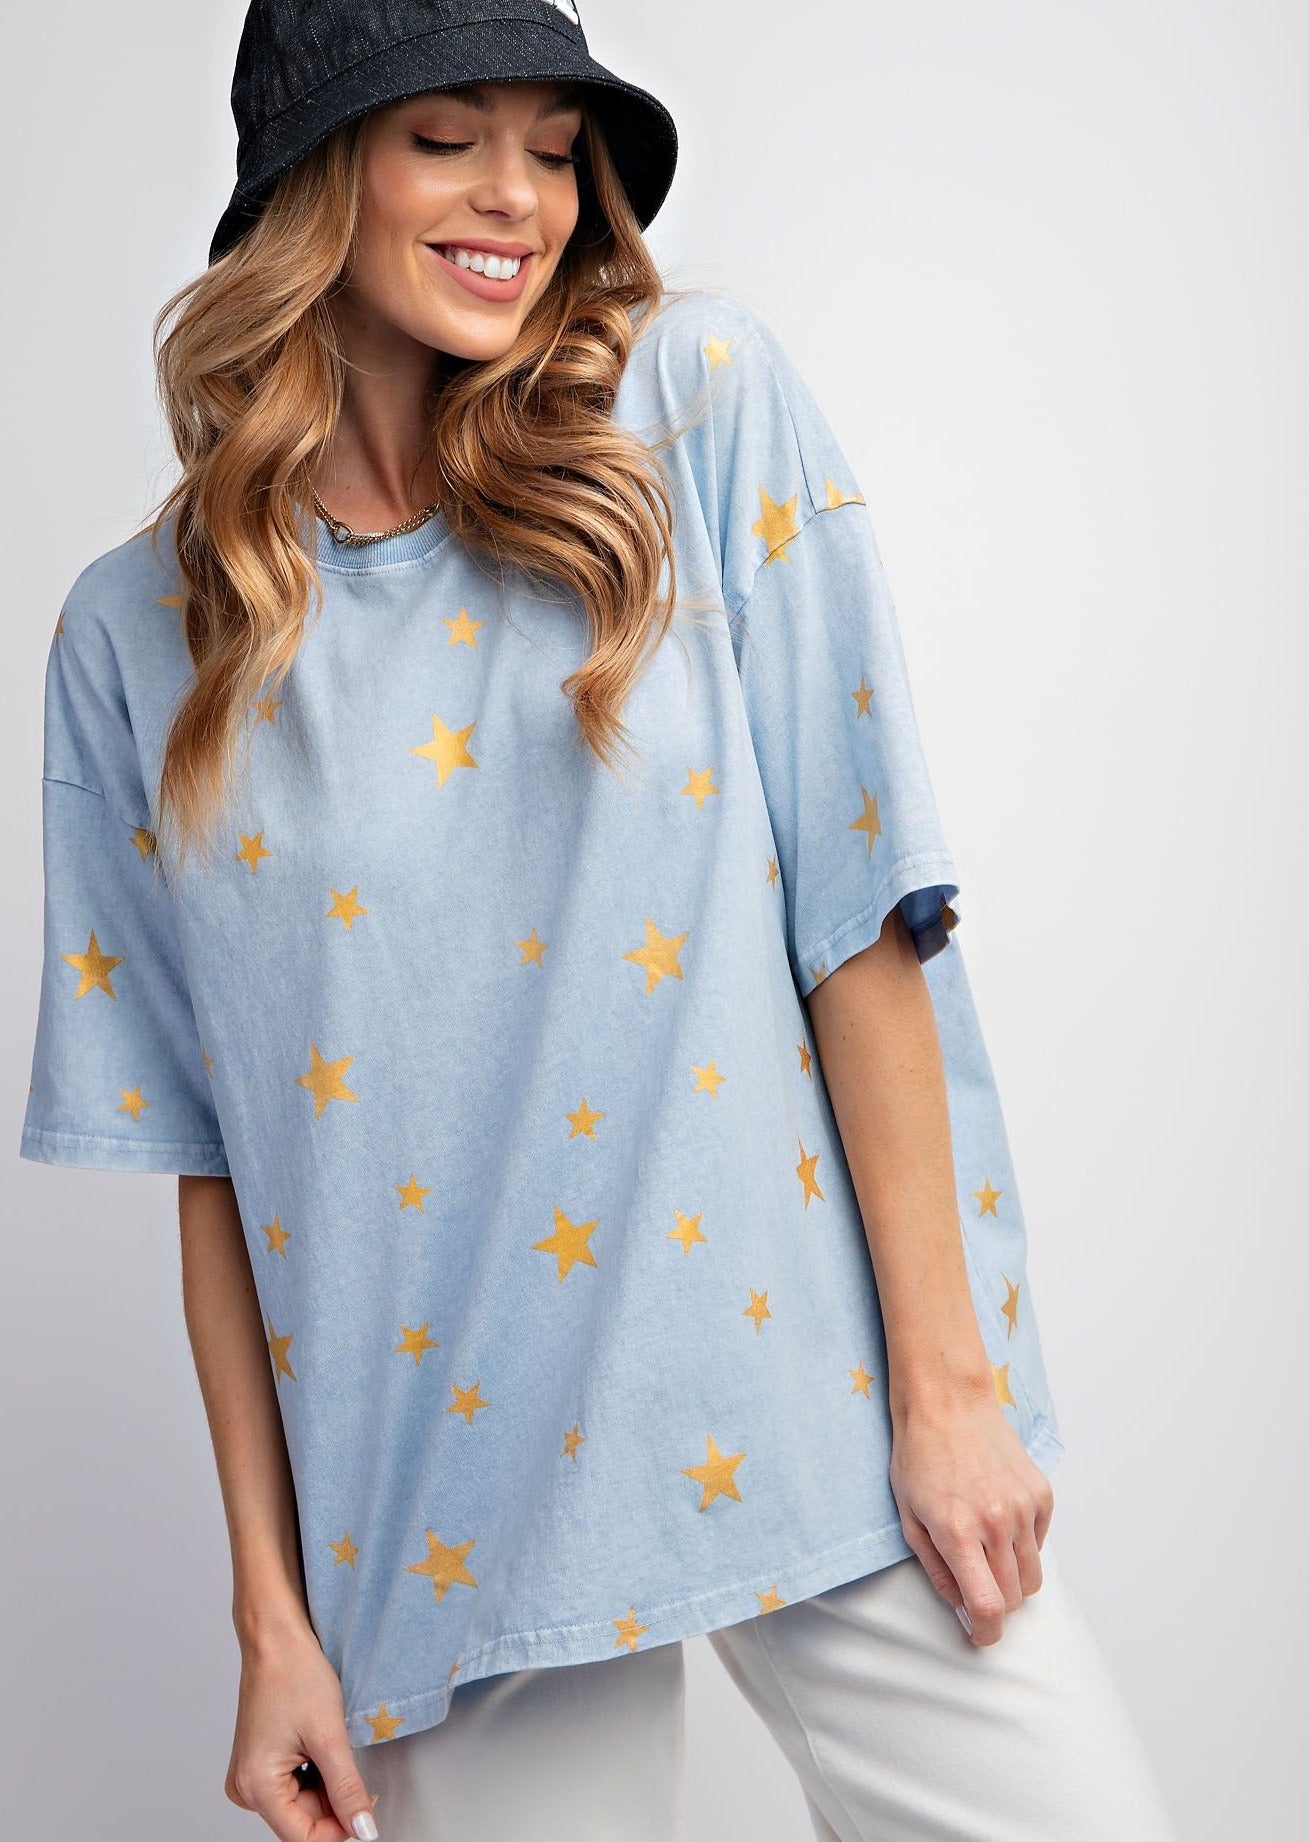 Gold Star Mineral Washed Cotton Knit Top by Easel - Light Peri - Plus/Regular-Apparel-Easel-LouisGeorge Boutique, Women’s Fashion Boutique Located in Trussville, Alabama